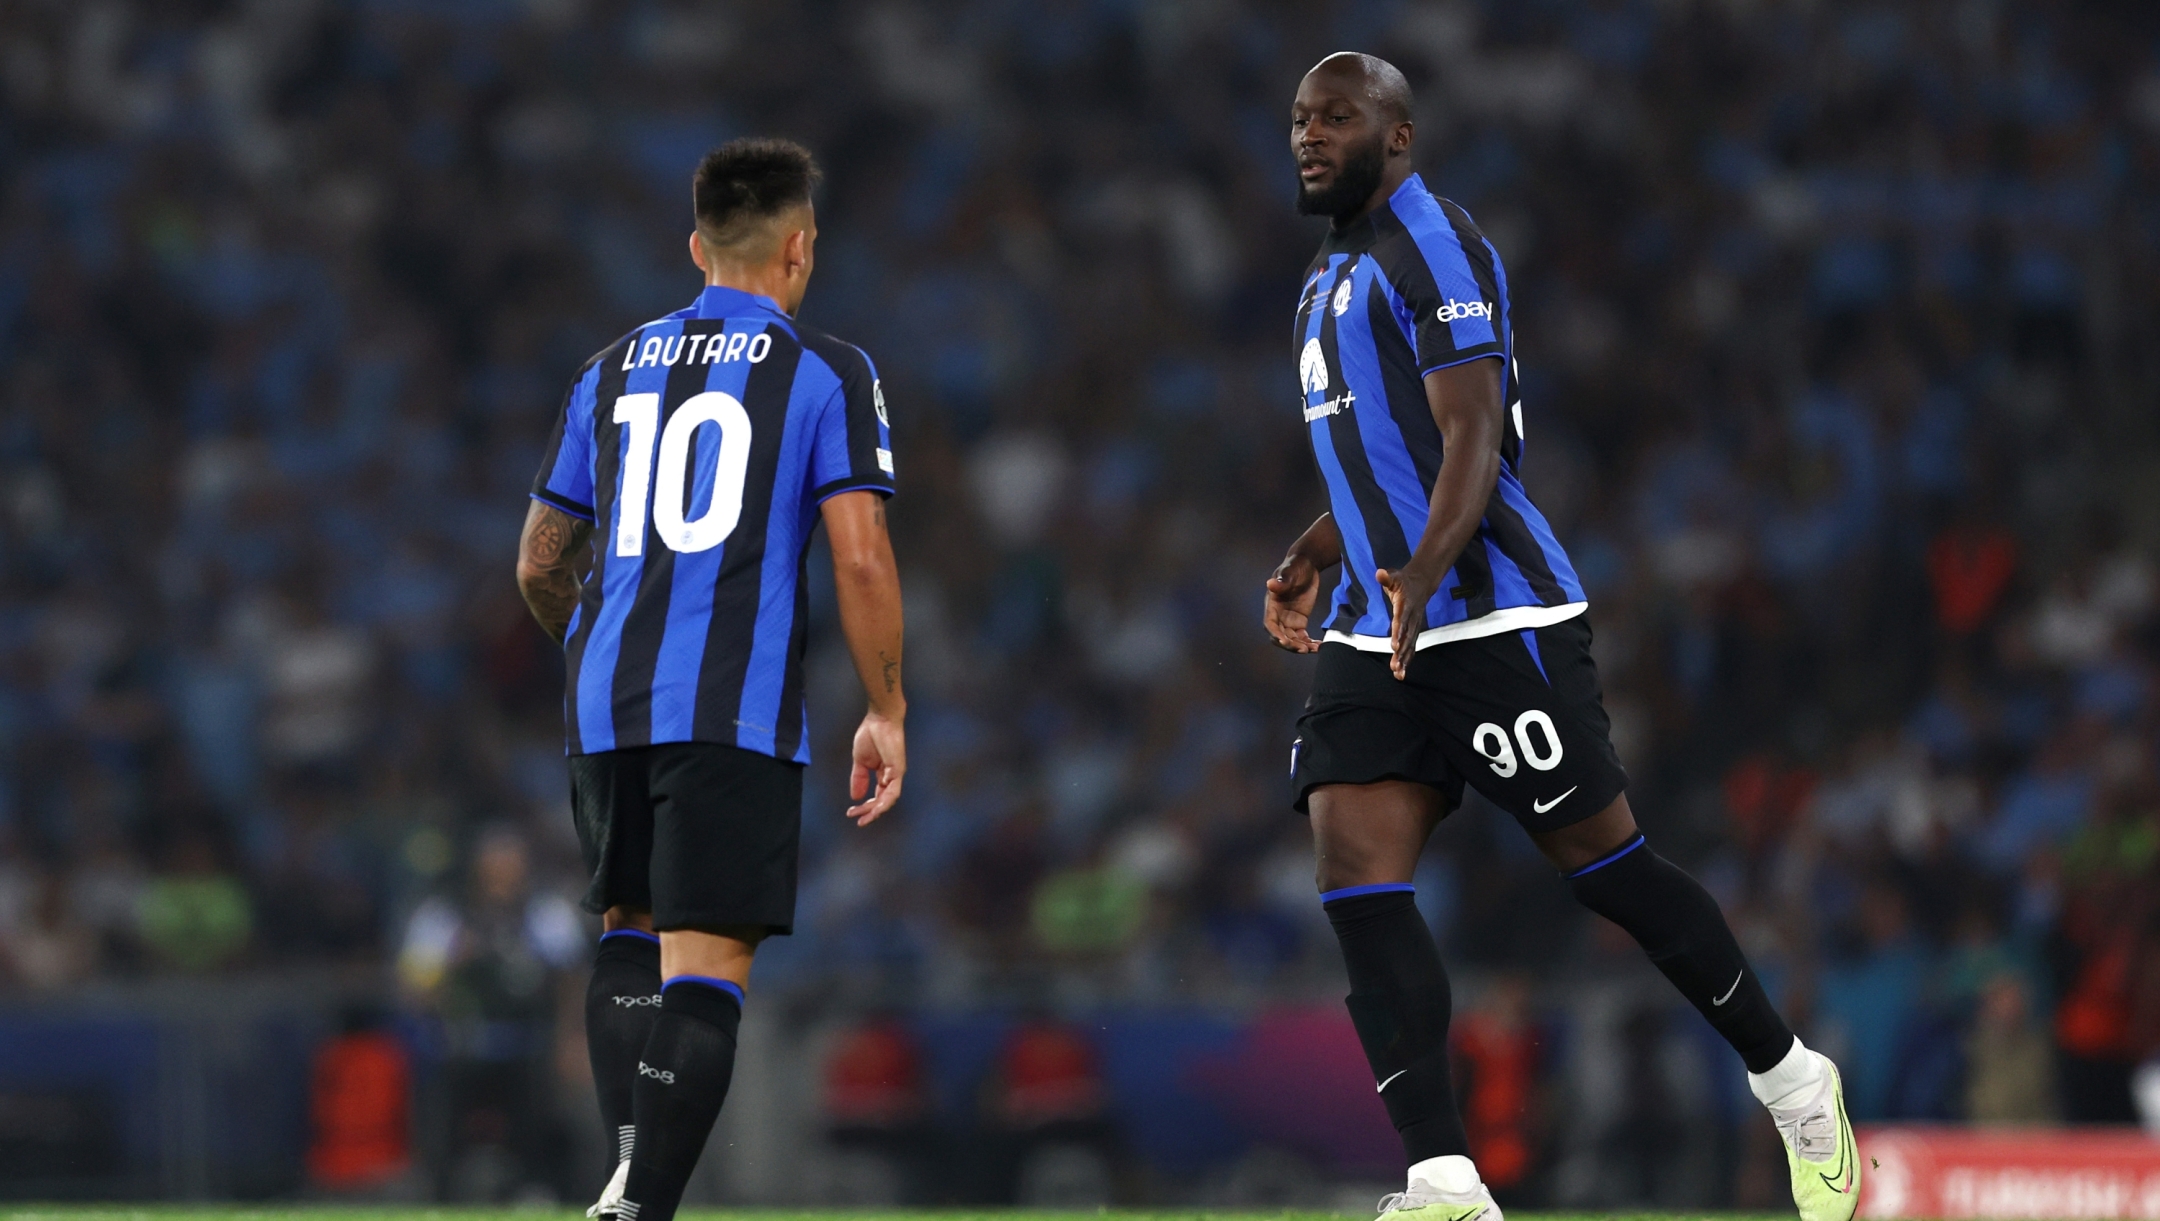 ISTANBUL, TURKEY - JUNE 10: Lautaro Martinez and Romelu Lukaku of FC Internazionale in action during the UEFA Champions League 2022/23 final match between FC Internazionale and Manchester City FC at Atatuerk Olympic Stadium on June 10, 2023 in Istanbul, Turkey. (Photo by Francesco Scaccianoce - Inter/Inter via Getty Images)